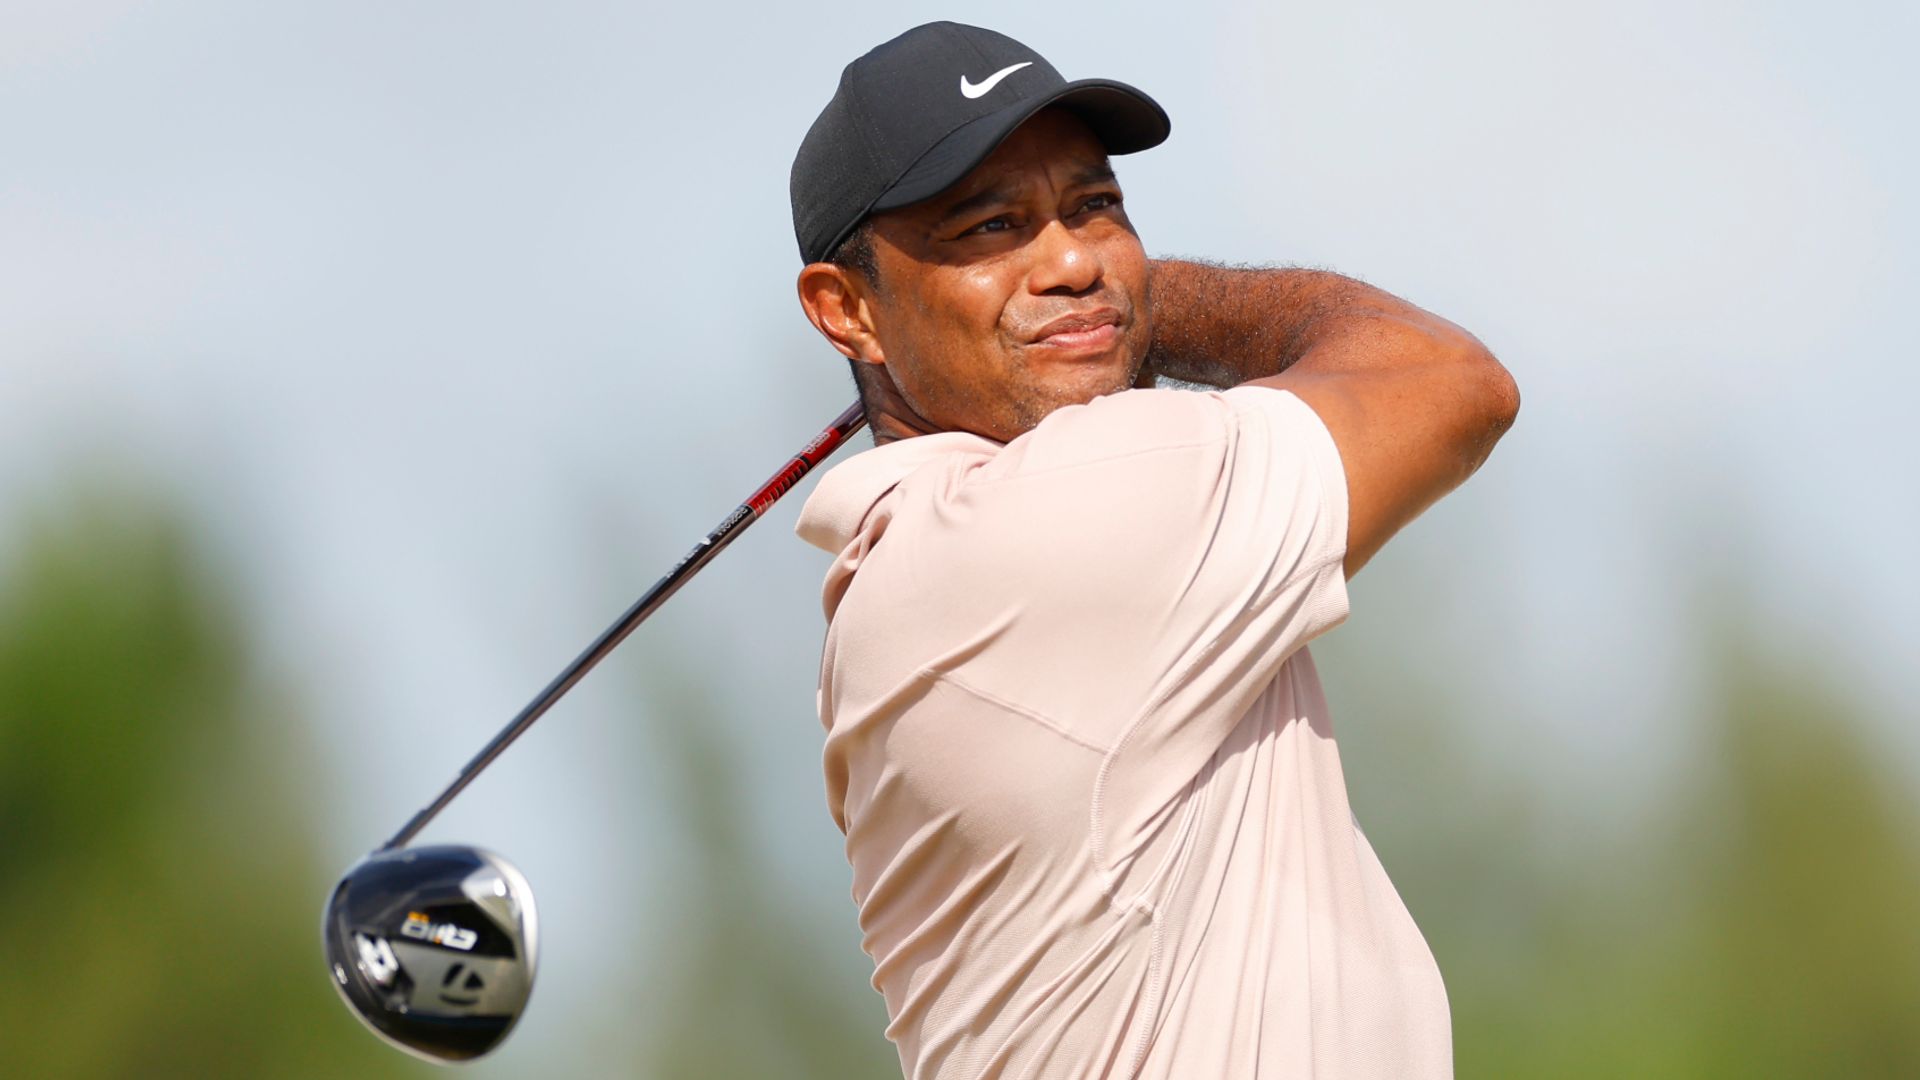 Woods moves up at Hero World Challenge but late bogeys hit again